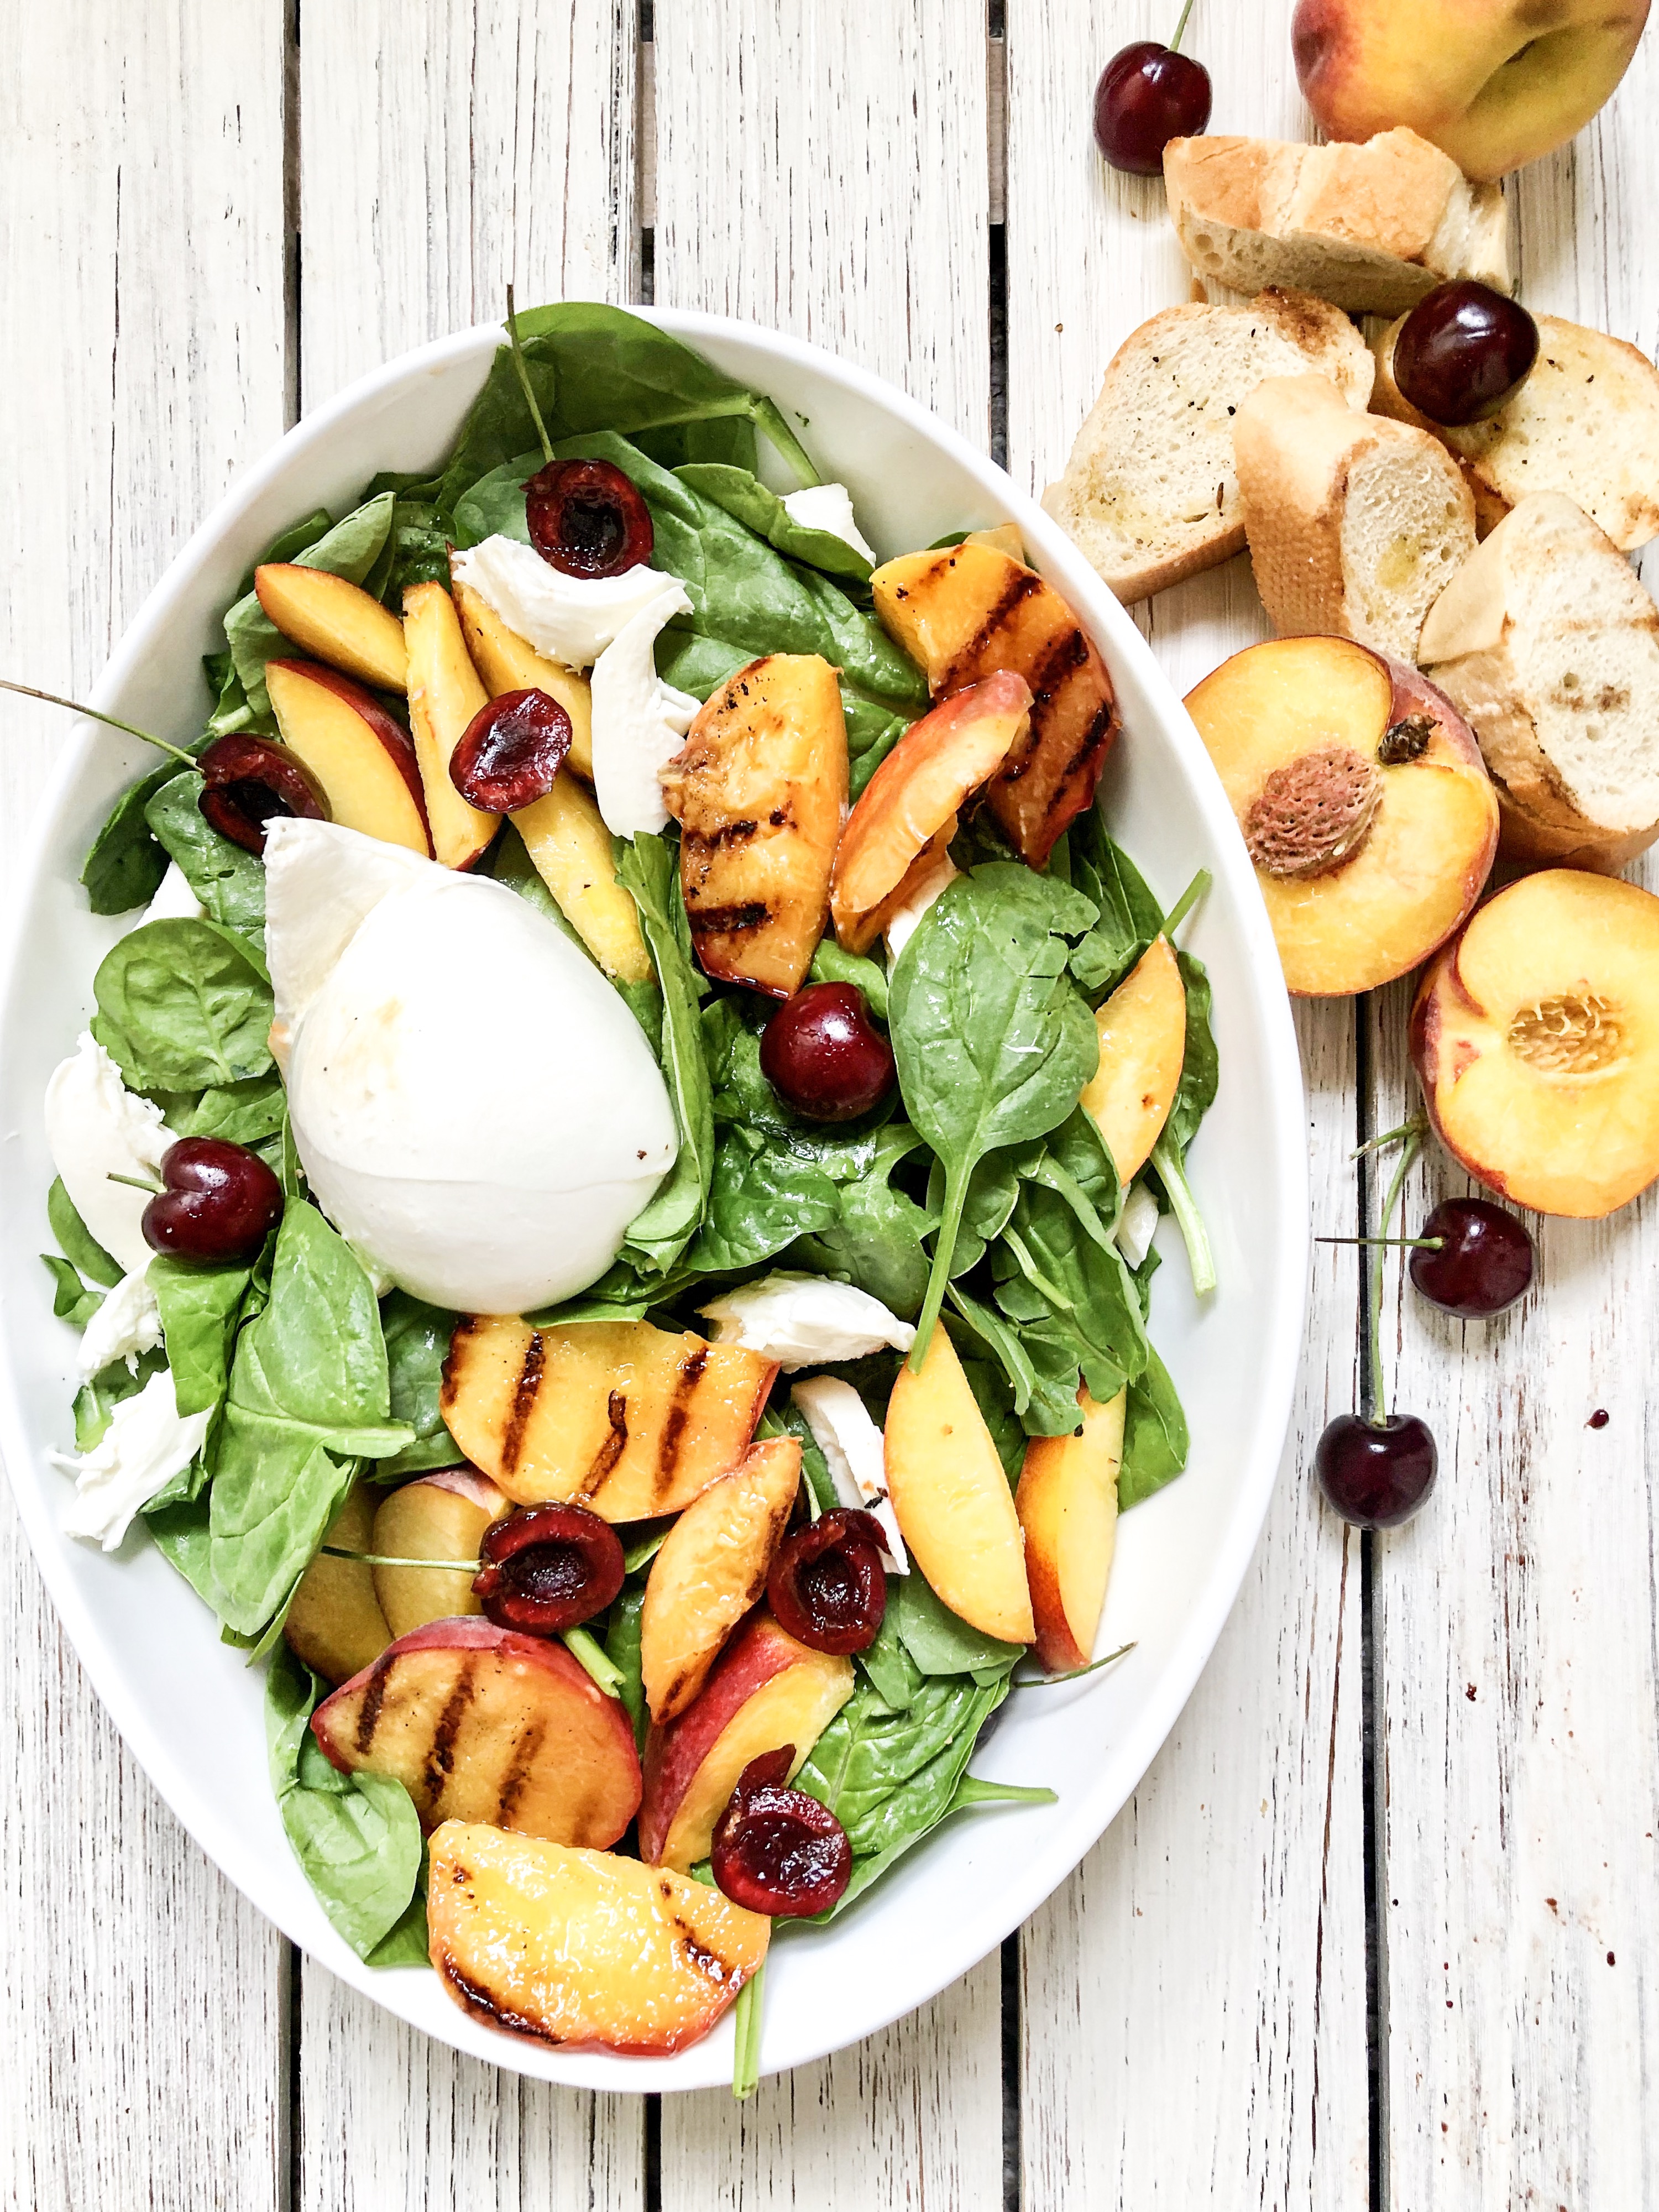 Lifestyle Blogger Chocolate & Lace shares her recipe for Grilled Peach and Burrata Salad. 